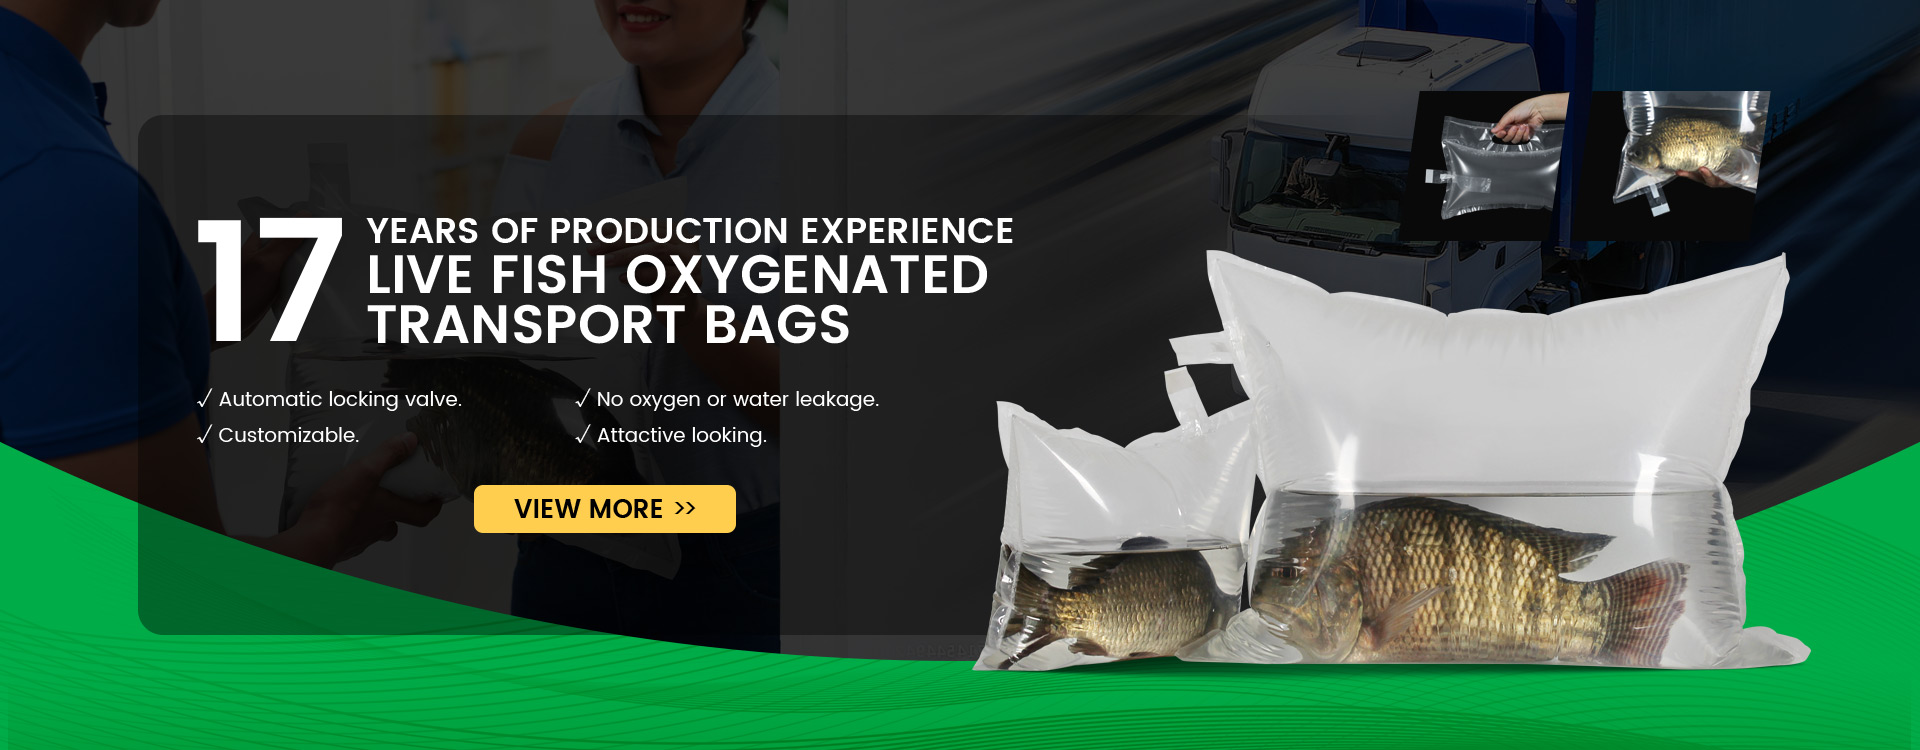 Live Fish Oxygenated Transport Bags